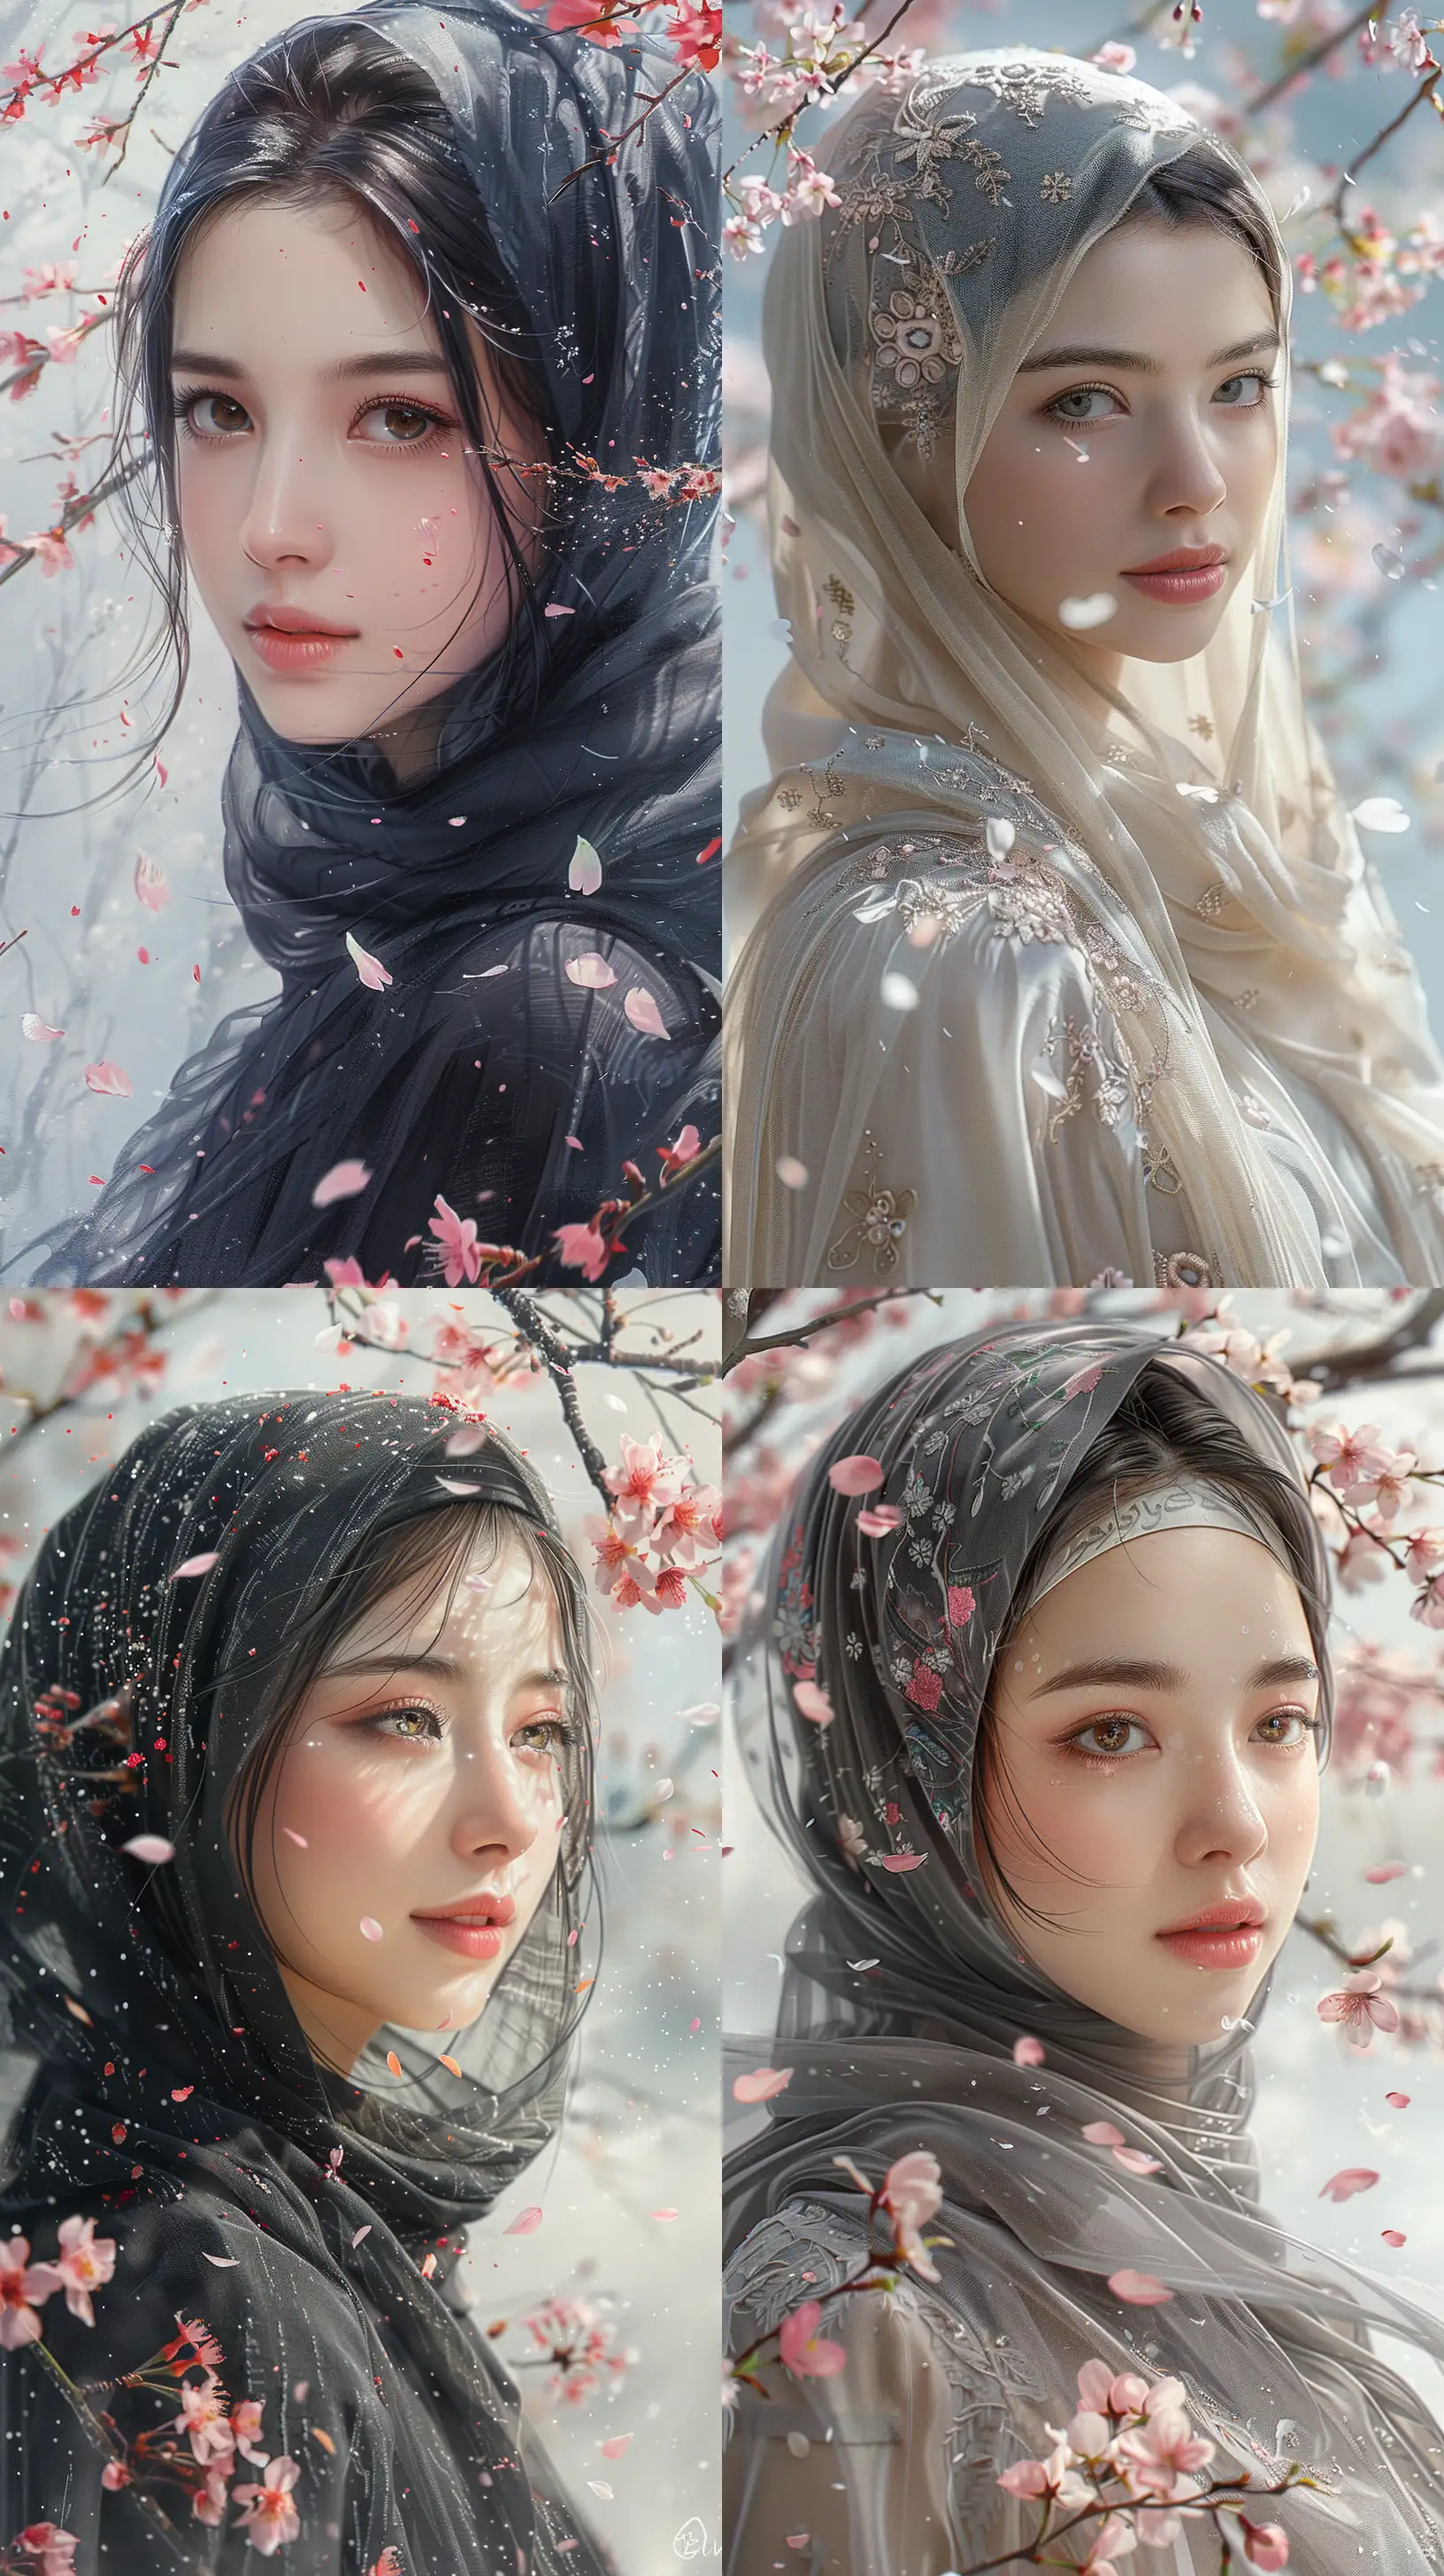 Serene-Hijabi-Woman-Beneath-Cherry-Blossoms-Tranquil-Portrait-with-Falling-Petals